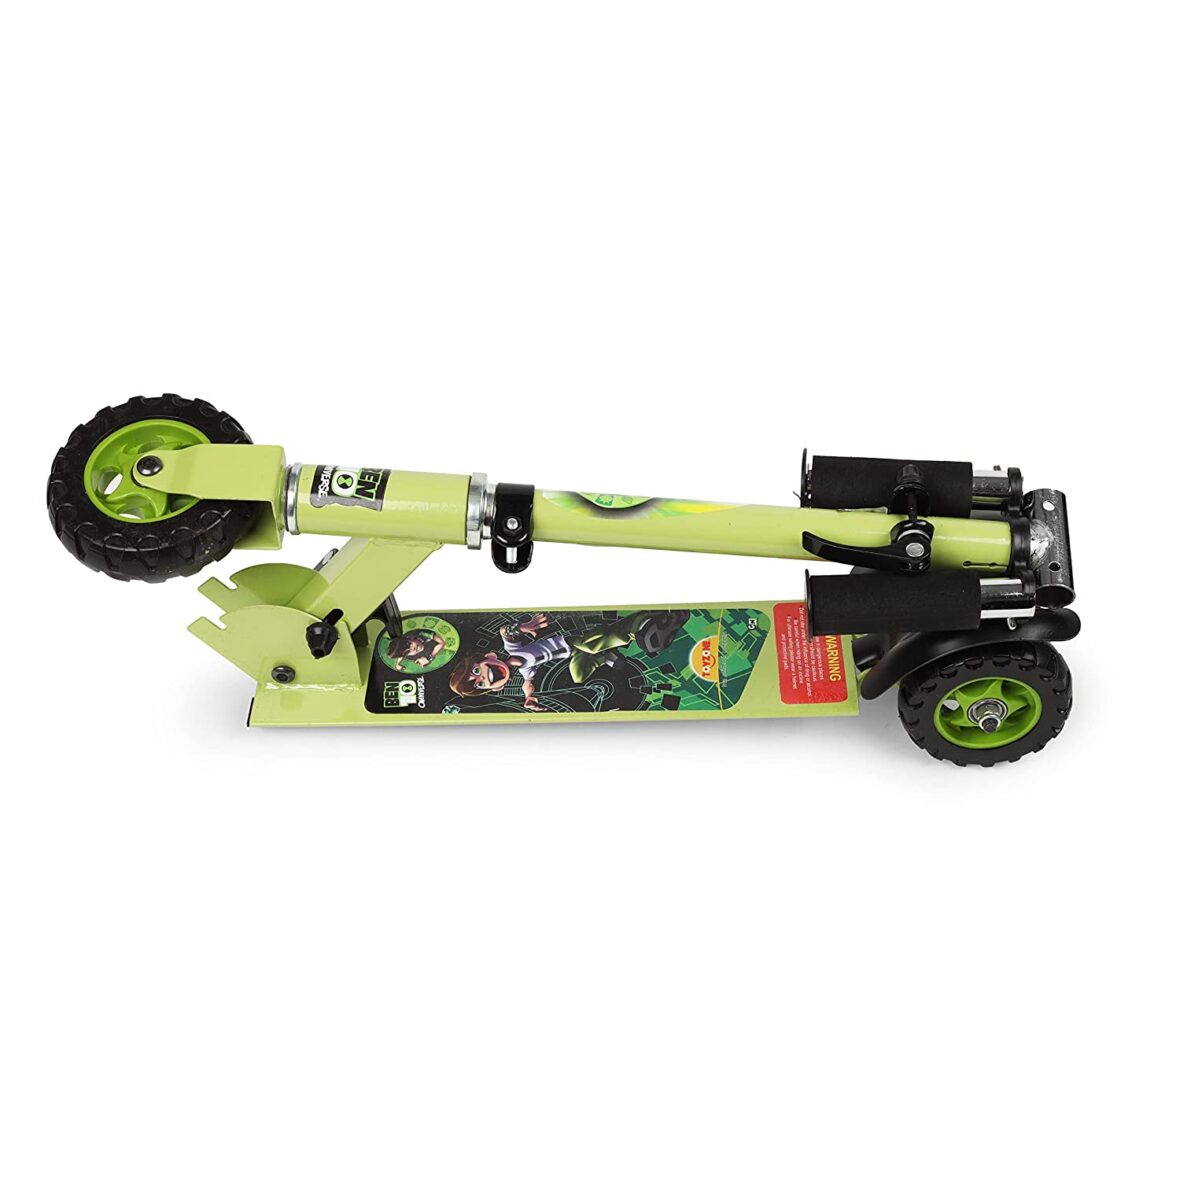 Toyzone Ben 10 Scooter Square-66019 | Kids Skate | Ben 10 Skating Ride on | 3 Wheel Kids Scooter | Smart Kick Scooter | Adjustable Height and Rear Brake | Foldable Scooter | for Kids Age 6+ Years